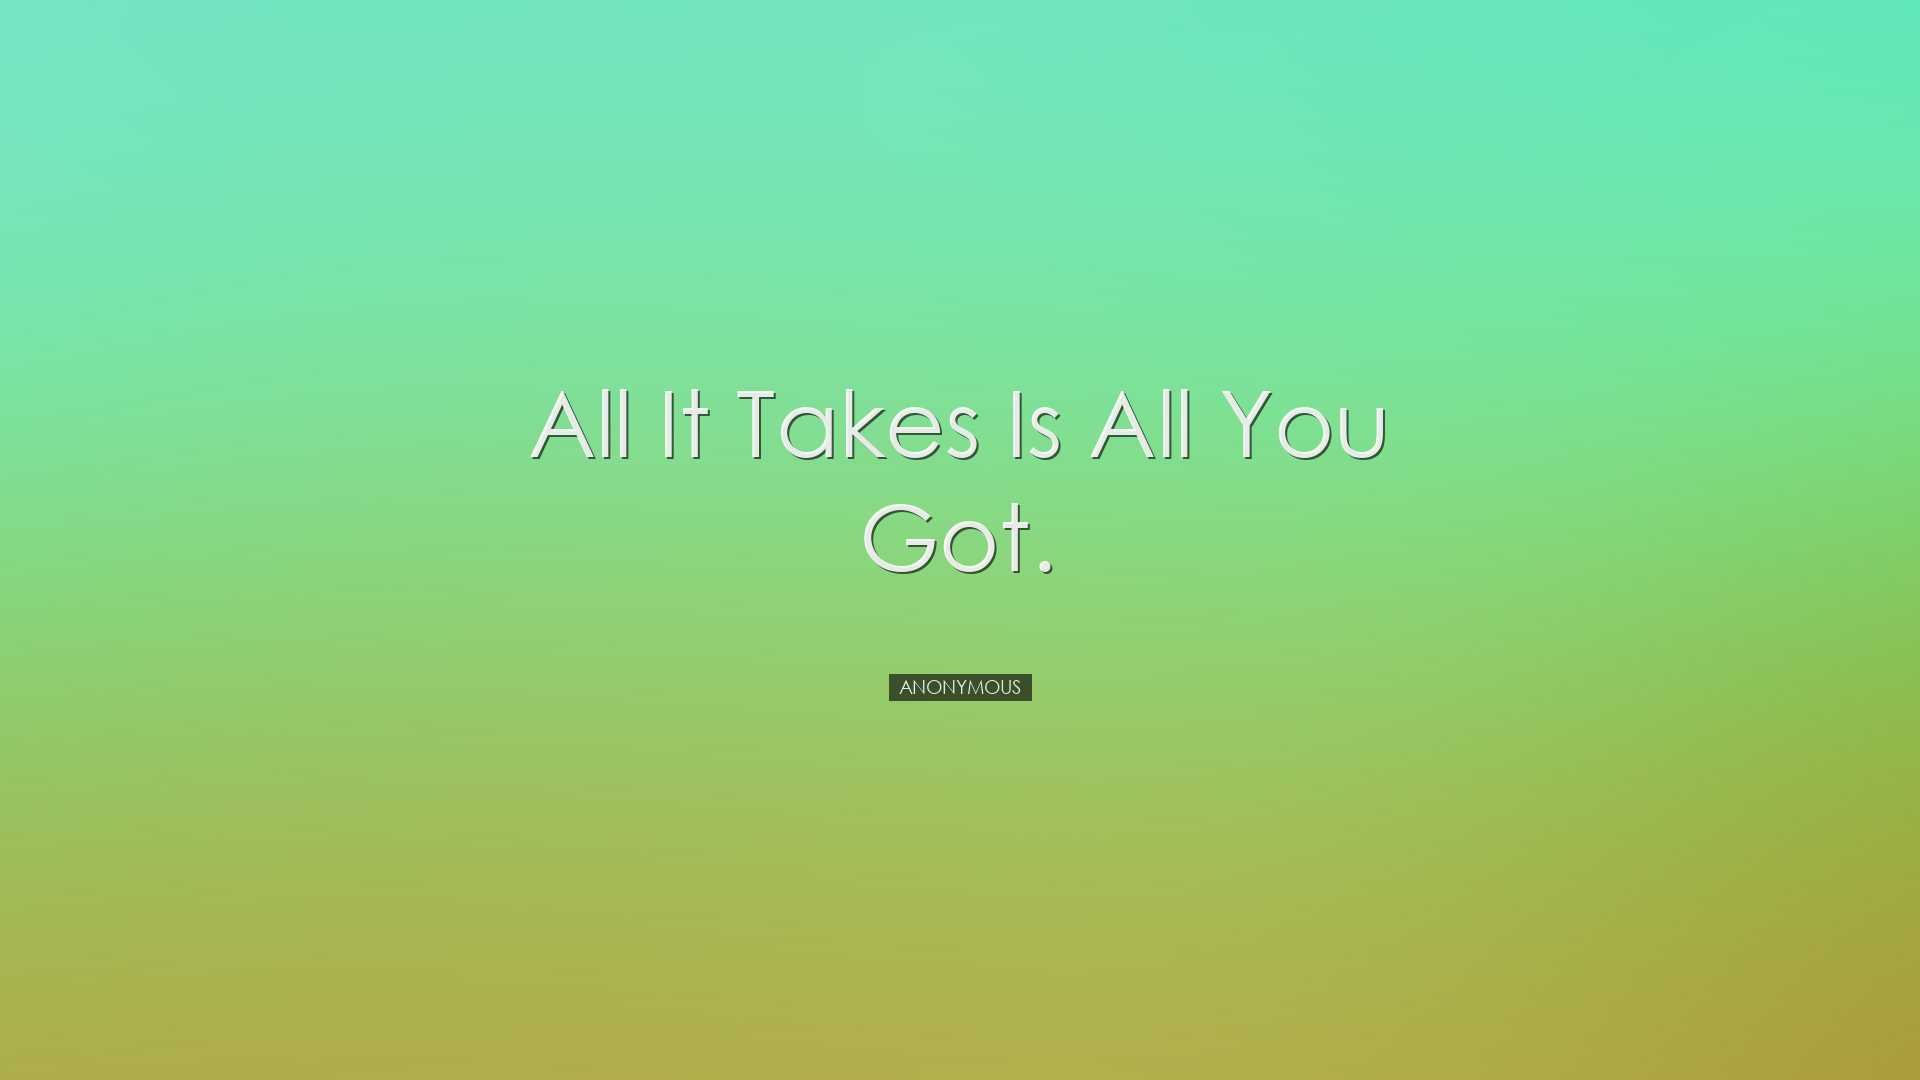 All it takes is all you got. - Anonymous